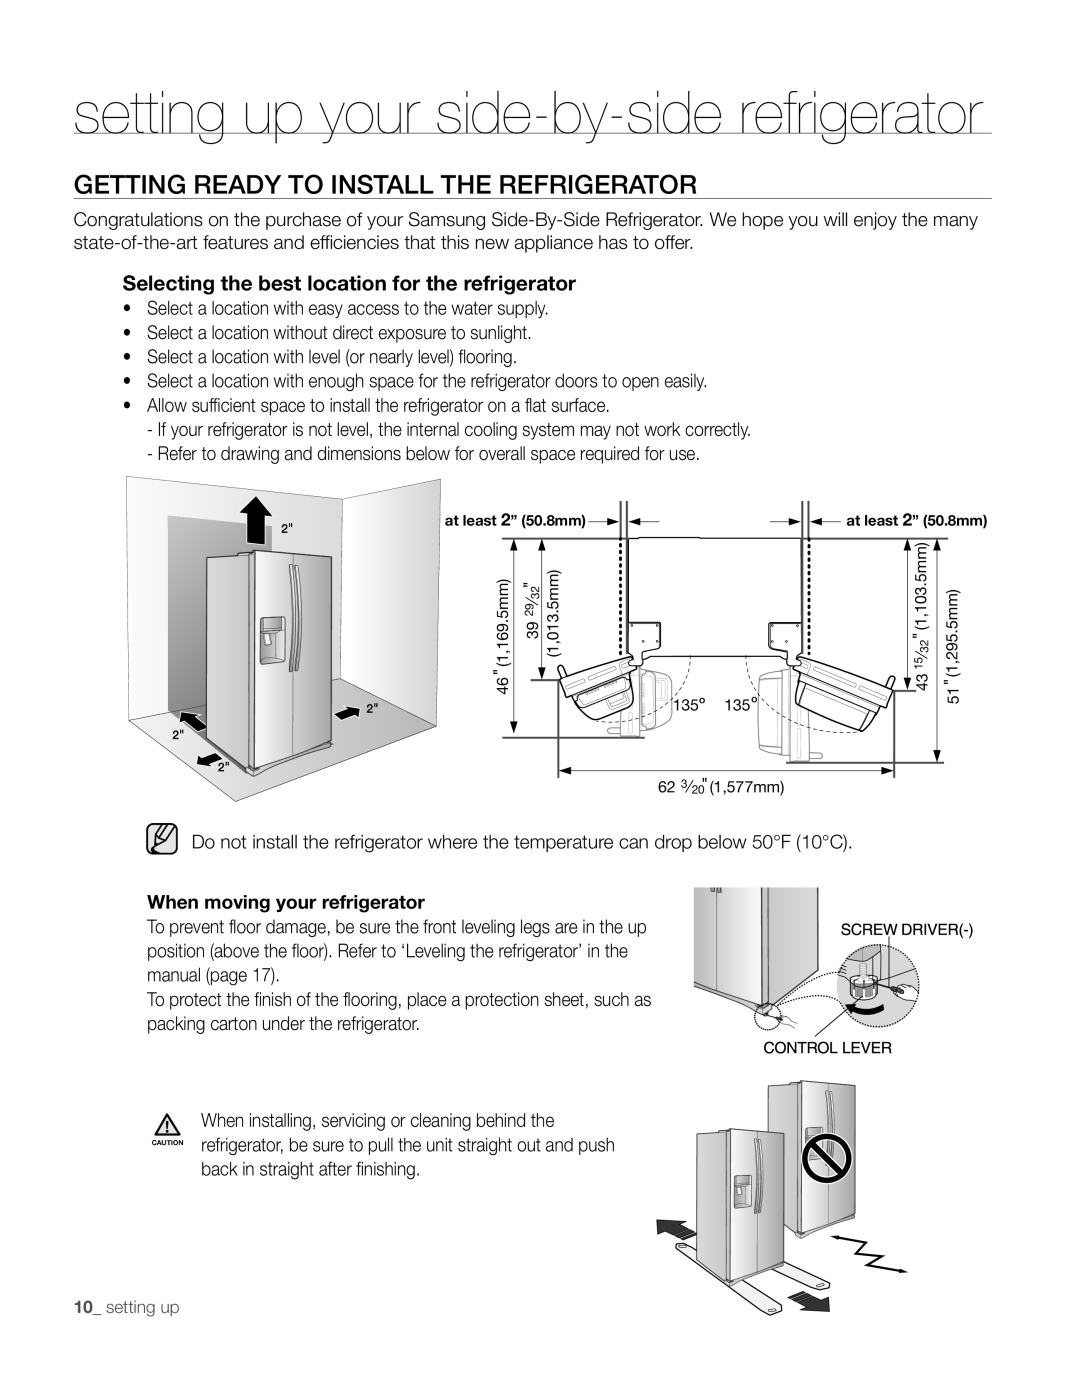 Samsung RS263TDWP, RS263TDRS setting up your side-by-side refrigerator, Getting ready to install the refrigerator 